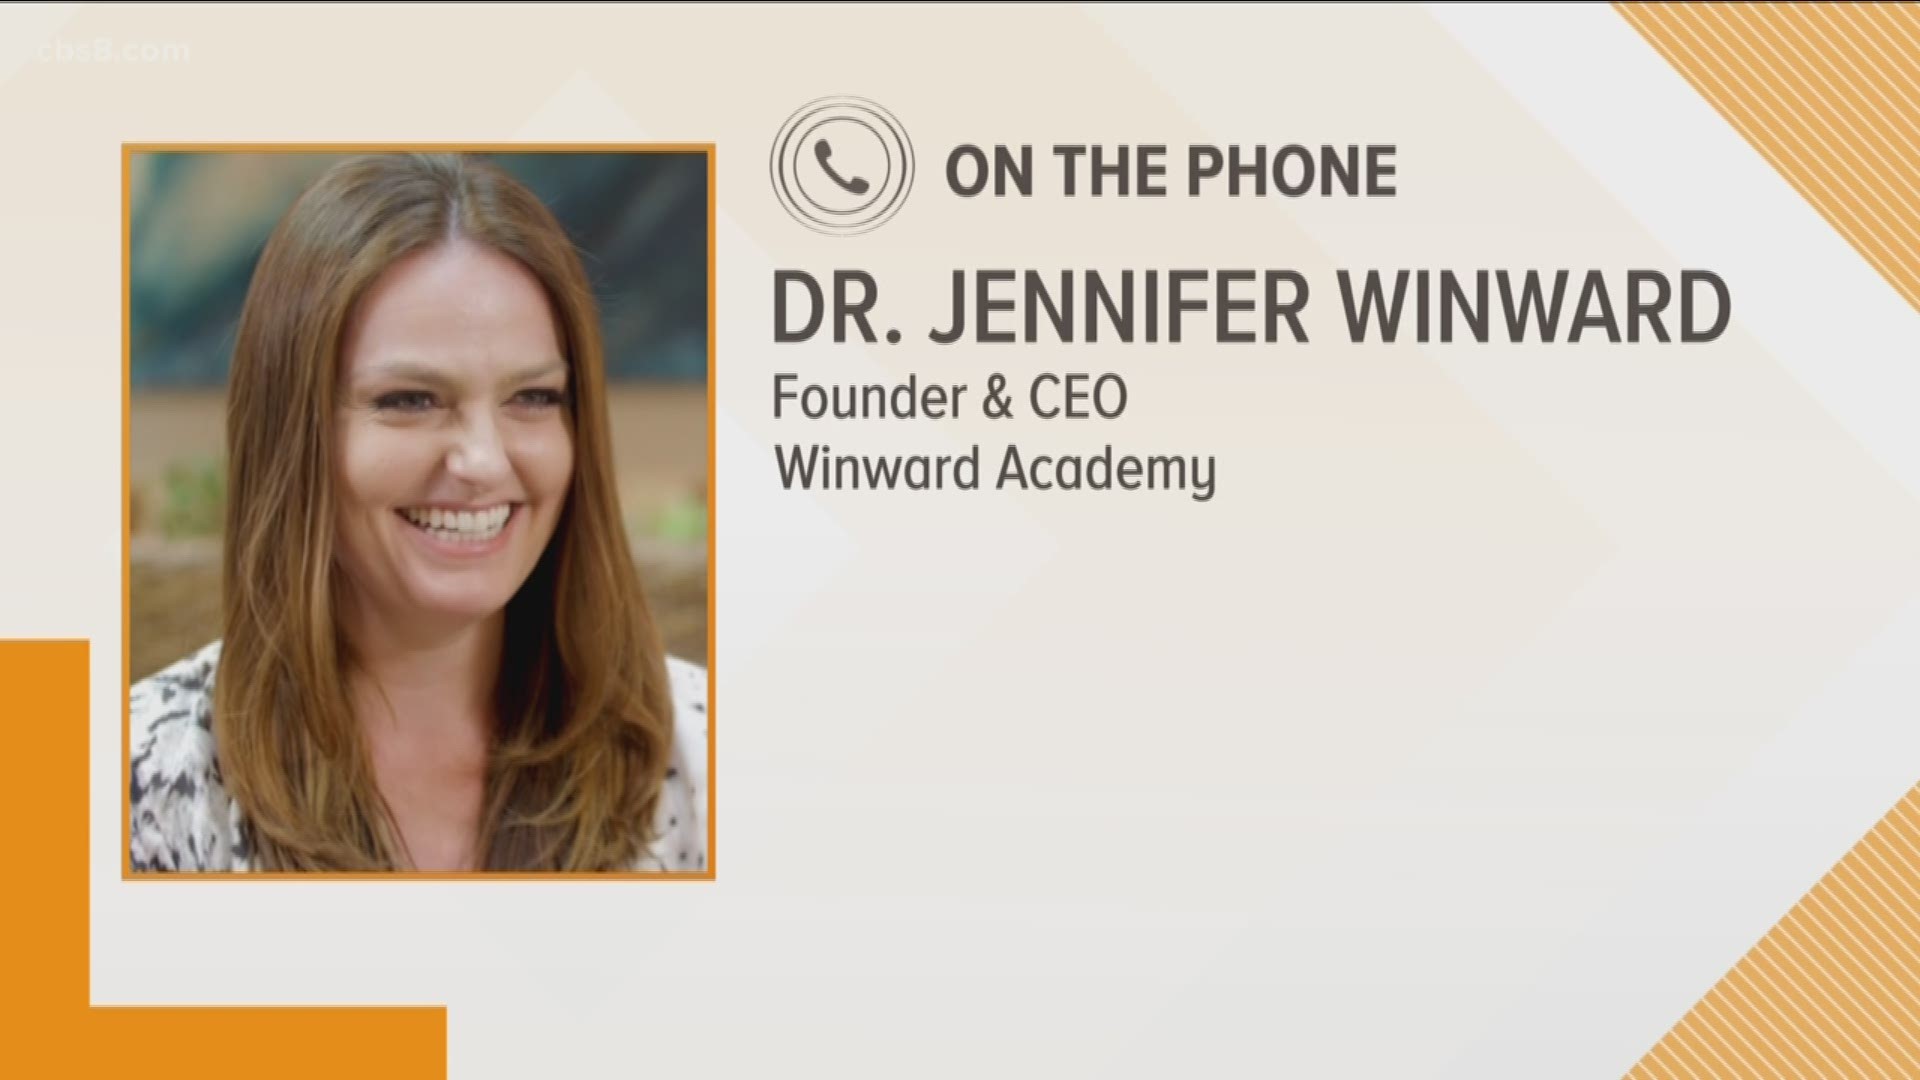 Teens missing out on milestone events, like prom and graduation, may need direction right now. Dr. Jennifer Winward, share ideas to help both parents and their teens